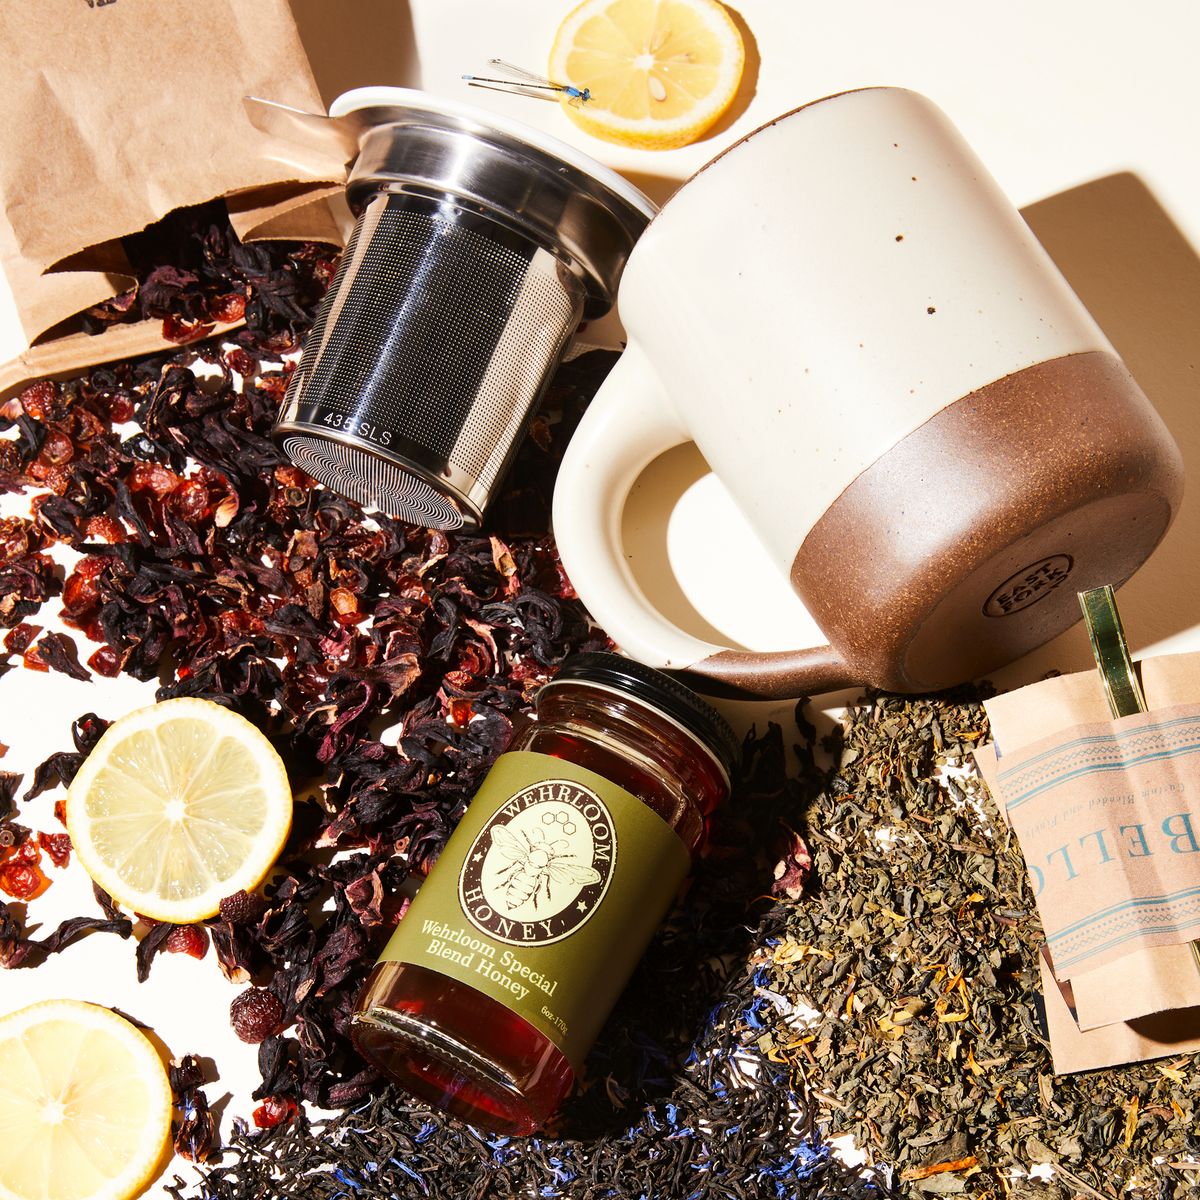 Two open bags of tea with three colorful varieties of loose tea, cut lemons with a jar of honey, big panna cotta mug, and metal tea strainer lying on their sides